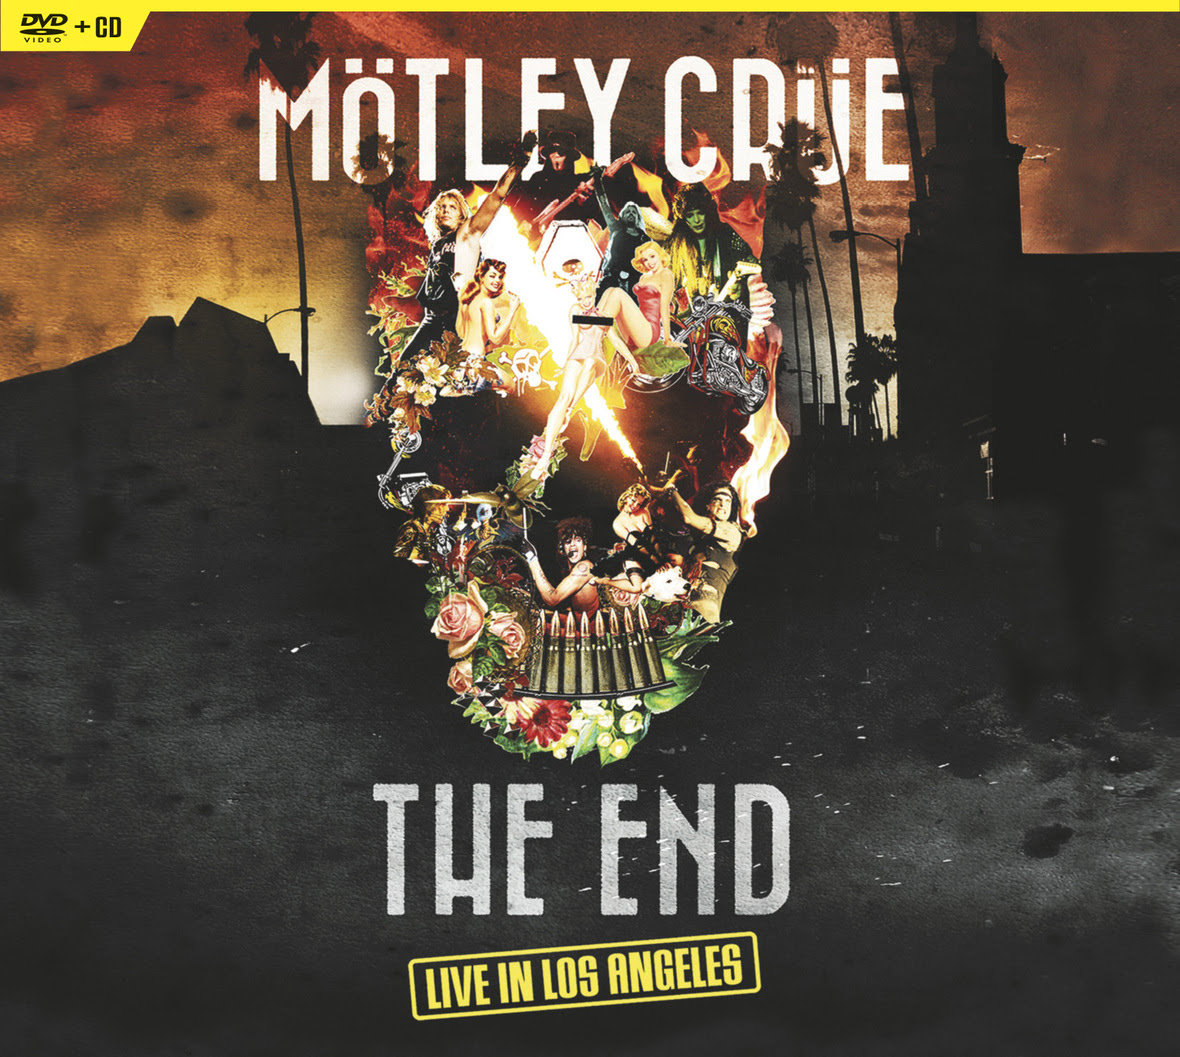 Motley Crue: The End Live in Los Angeles